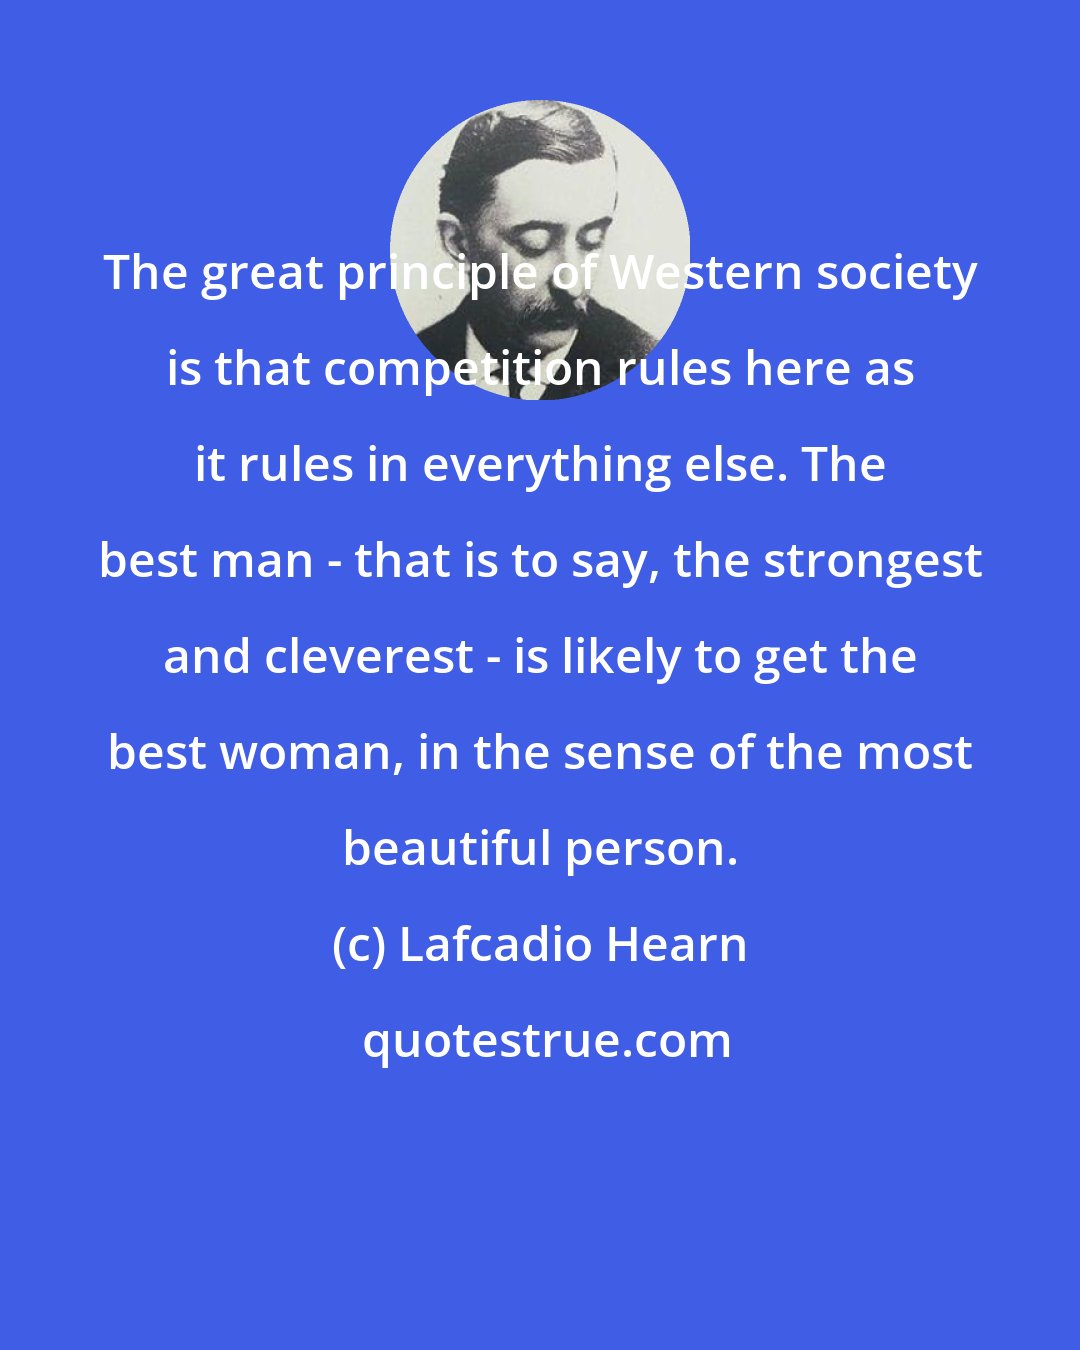 Lafcadio Hearn: The great principle of Western society is that competition rules here as it rules in everything else. The best man - that is to say, the strongest and cleverest - is likely to get the best woman, in the sense of the most beautiful person.